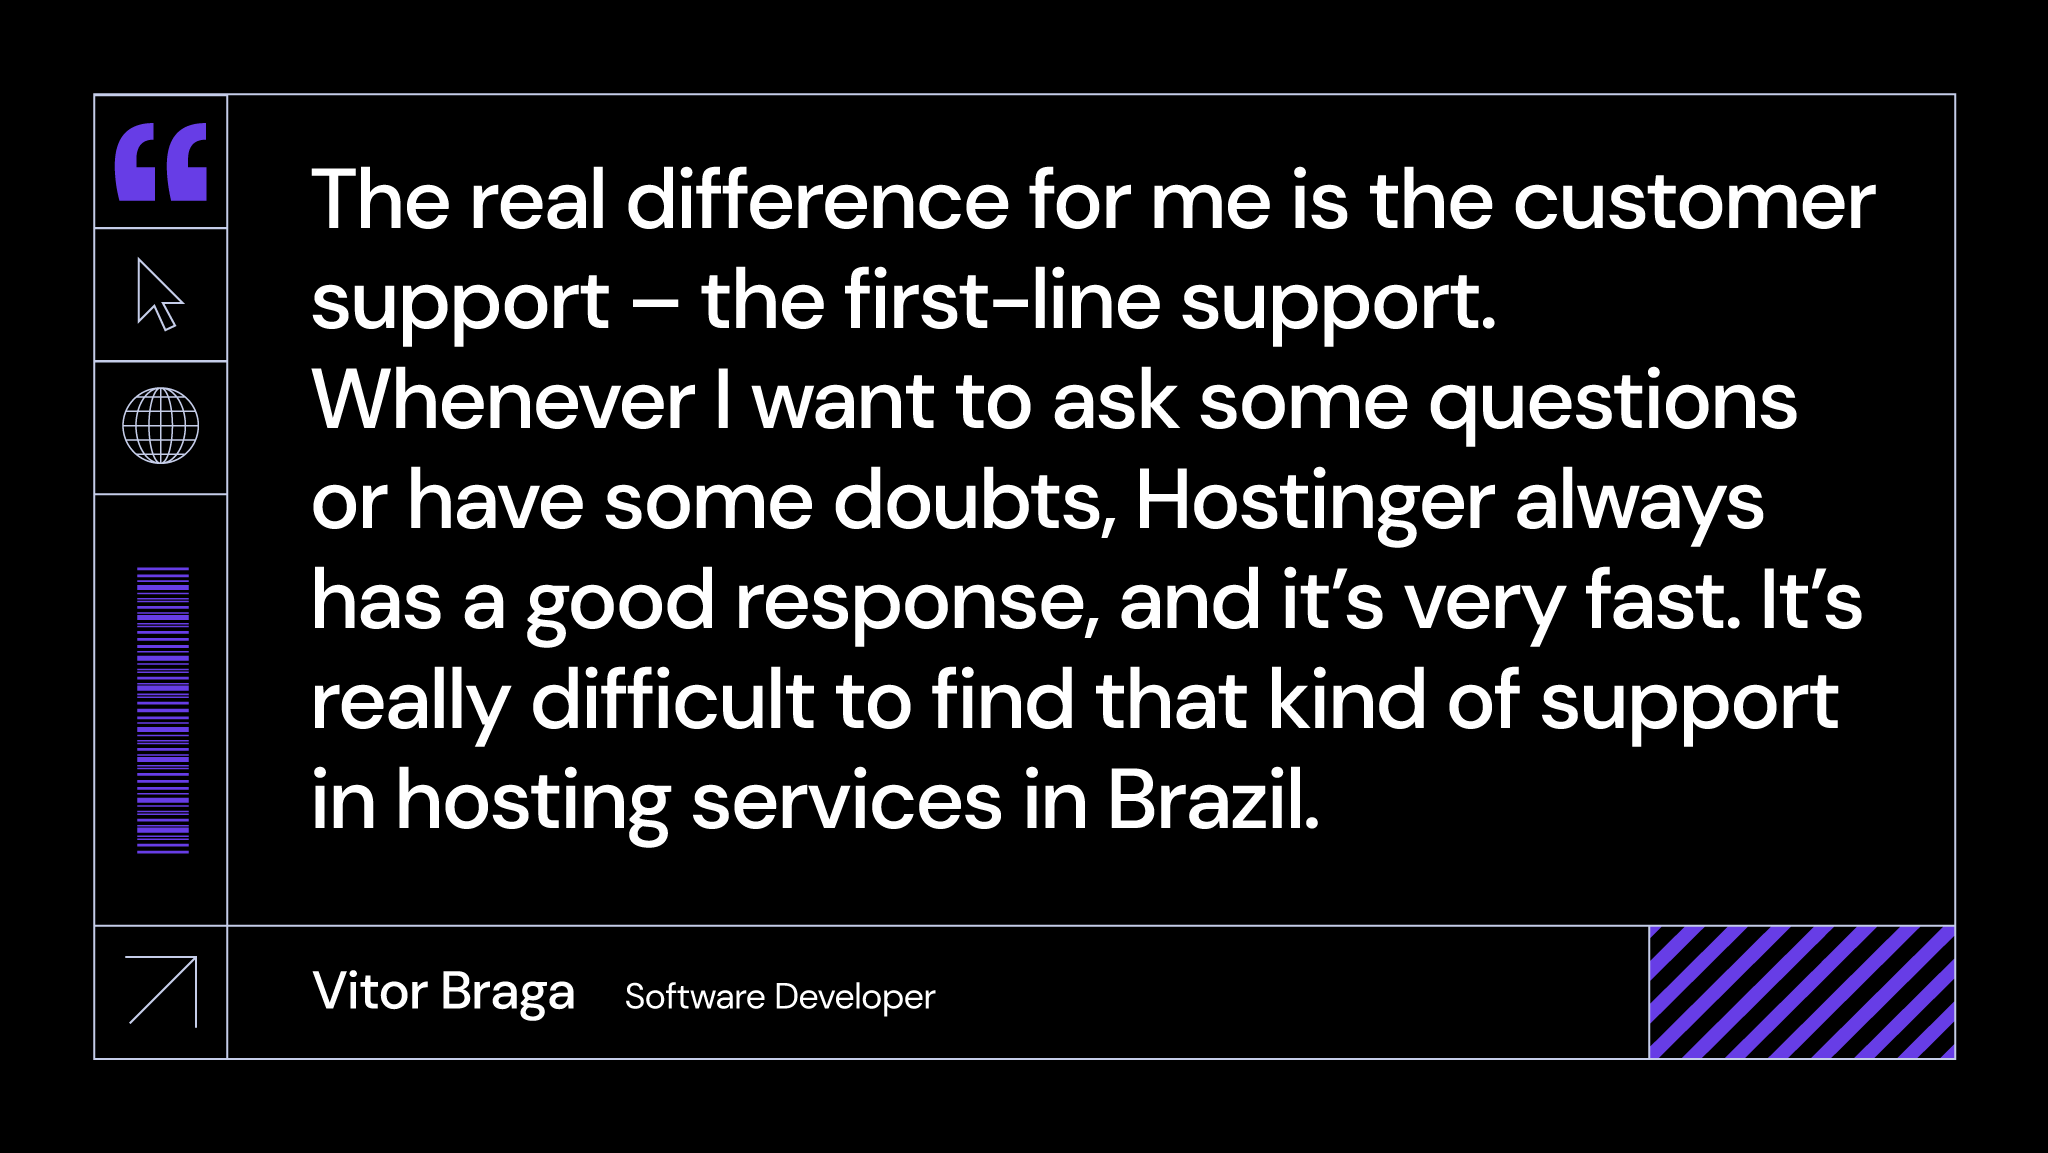 Quote by Vitor on how fast and responsive Hostinger's Customer Success team is